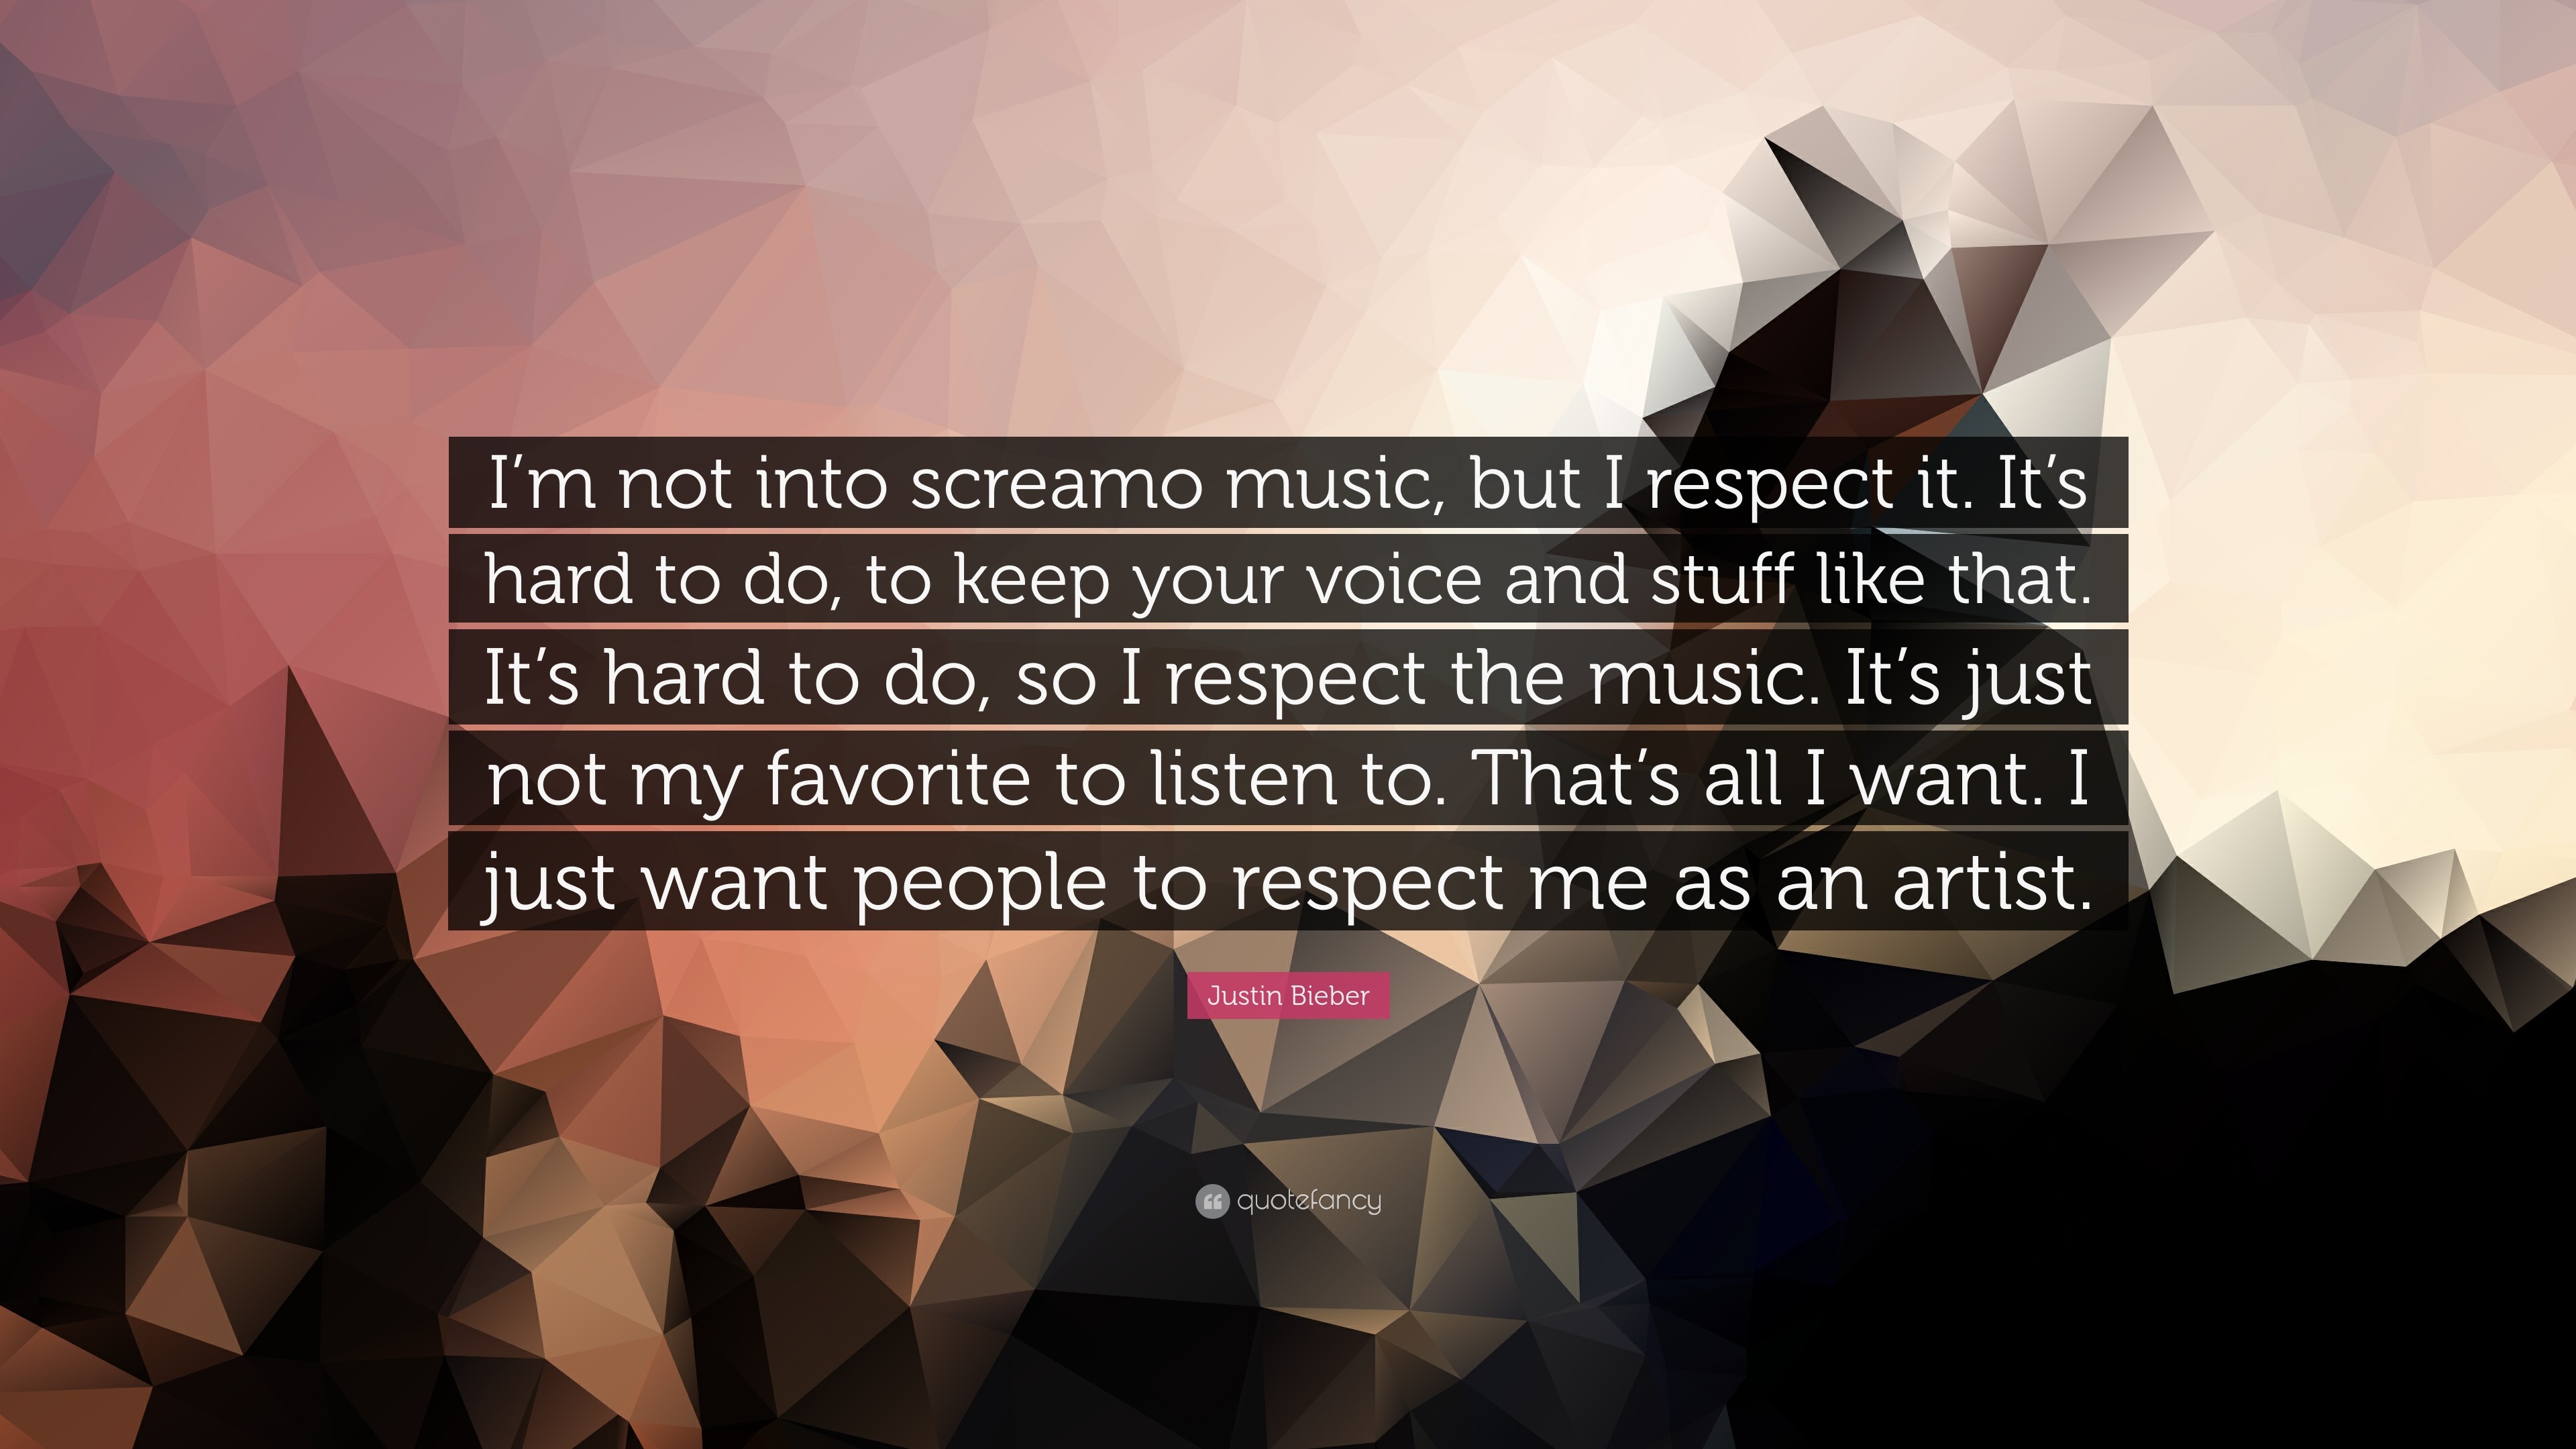 3840x2160 Justin Bieber Quote: “I'm not into screamo music, but I respect